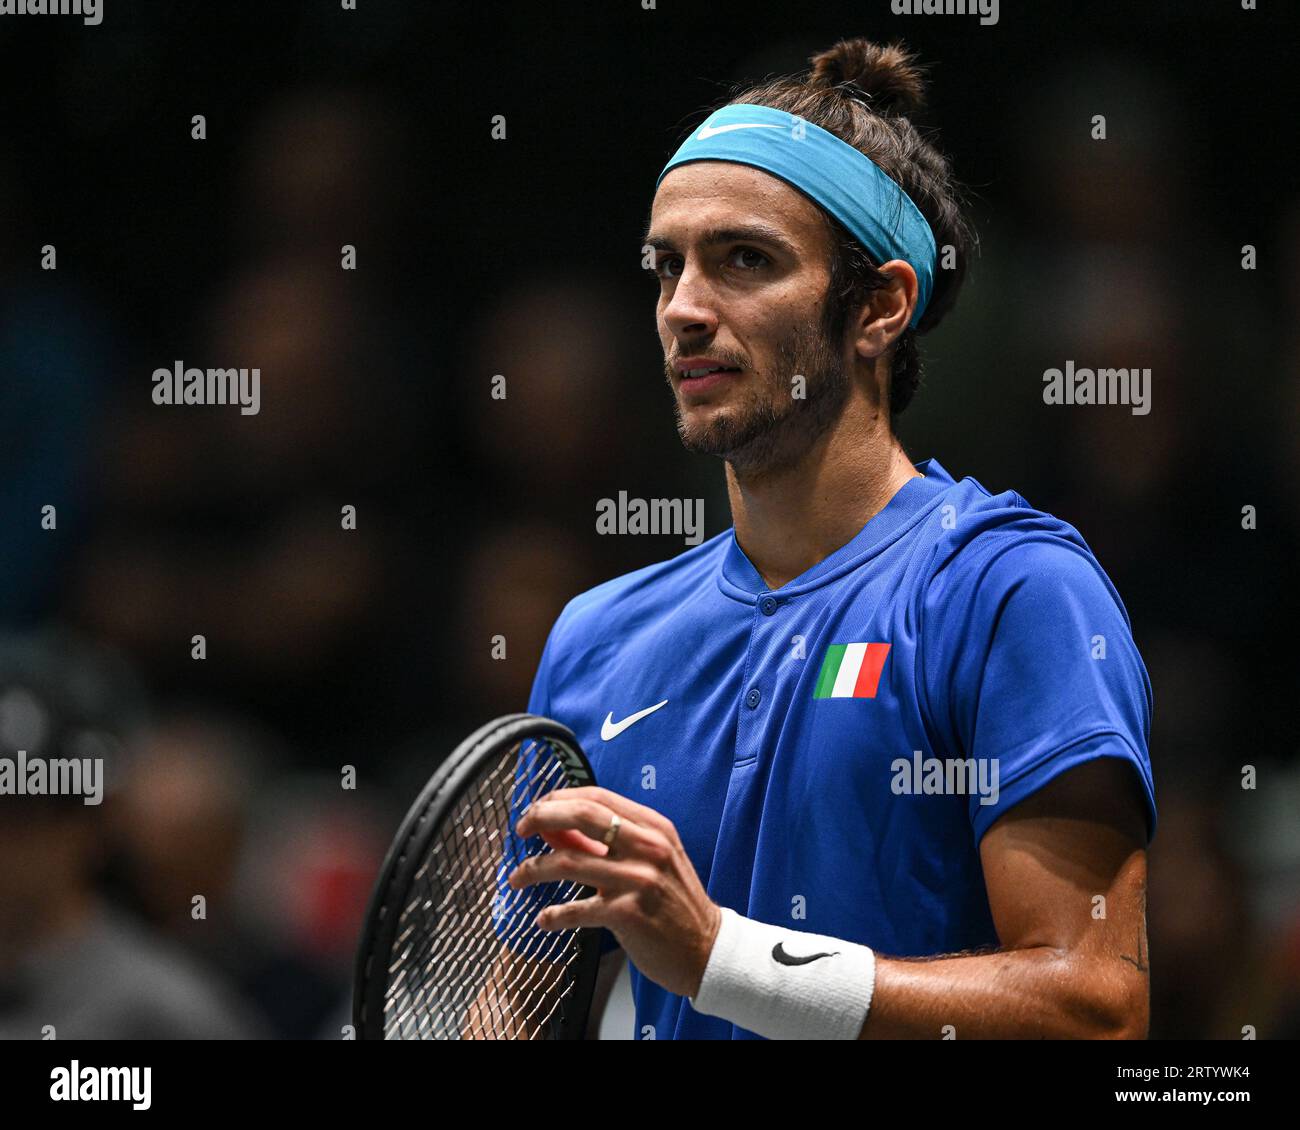 Lorenzo Musetti during the Davis Cup finals match between Italy and Canada at Unipol Arena in Bologna, Italia Tennis (Cristiano Mazzi/SPP) Credit SPP Sport Press Photo